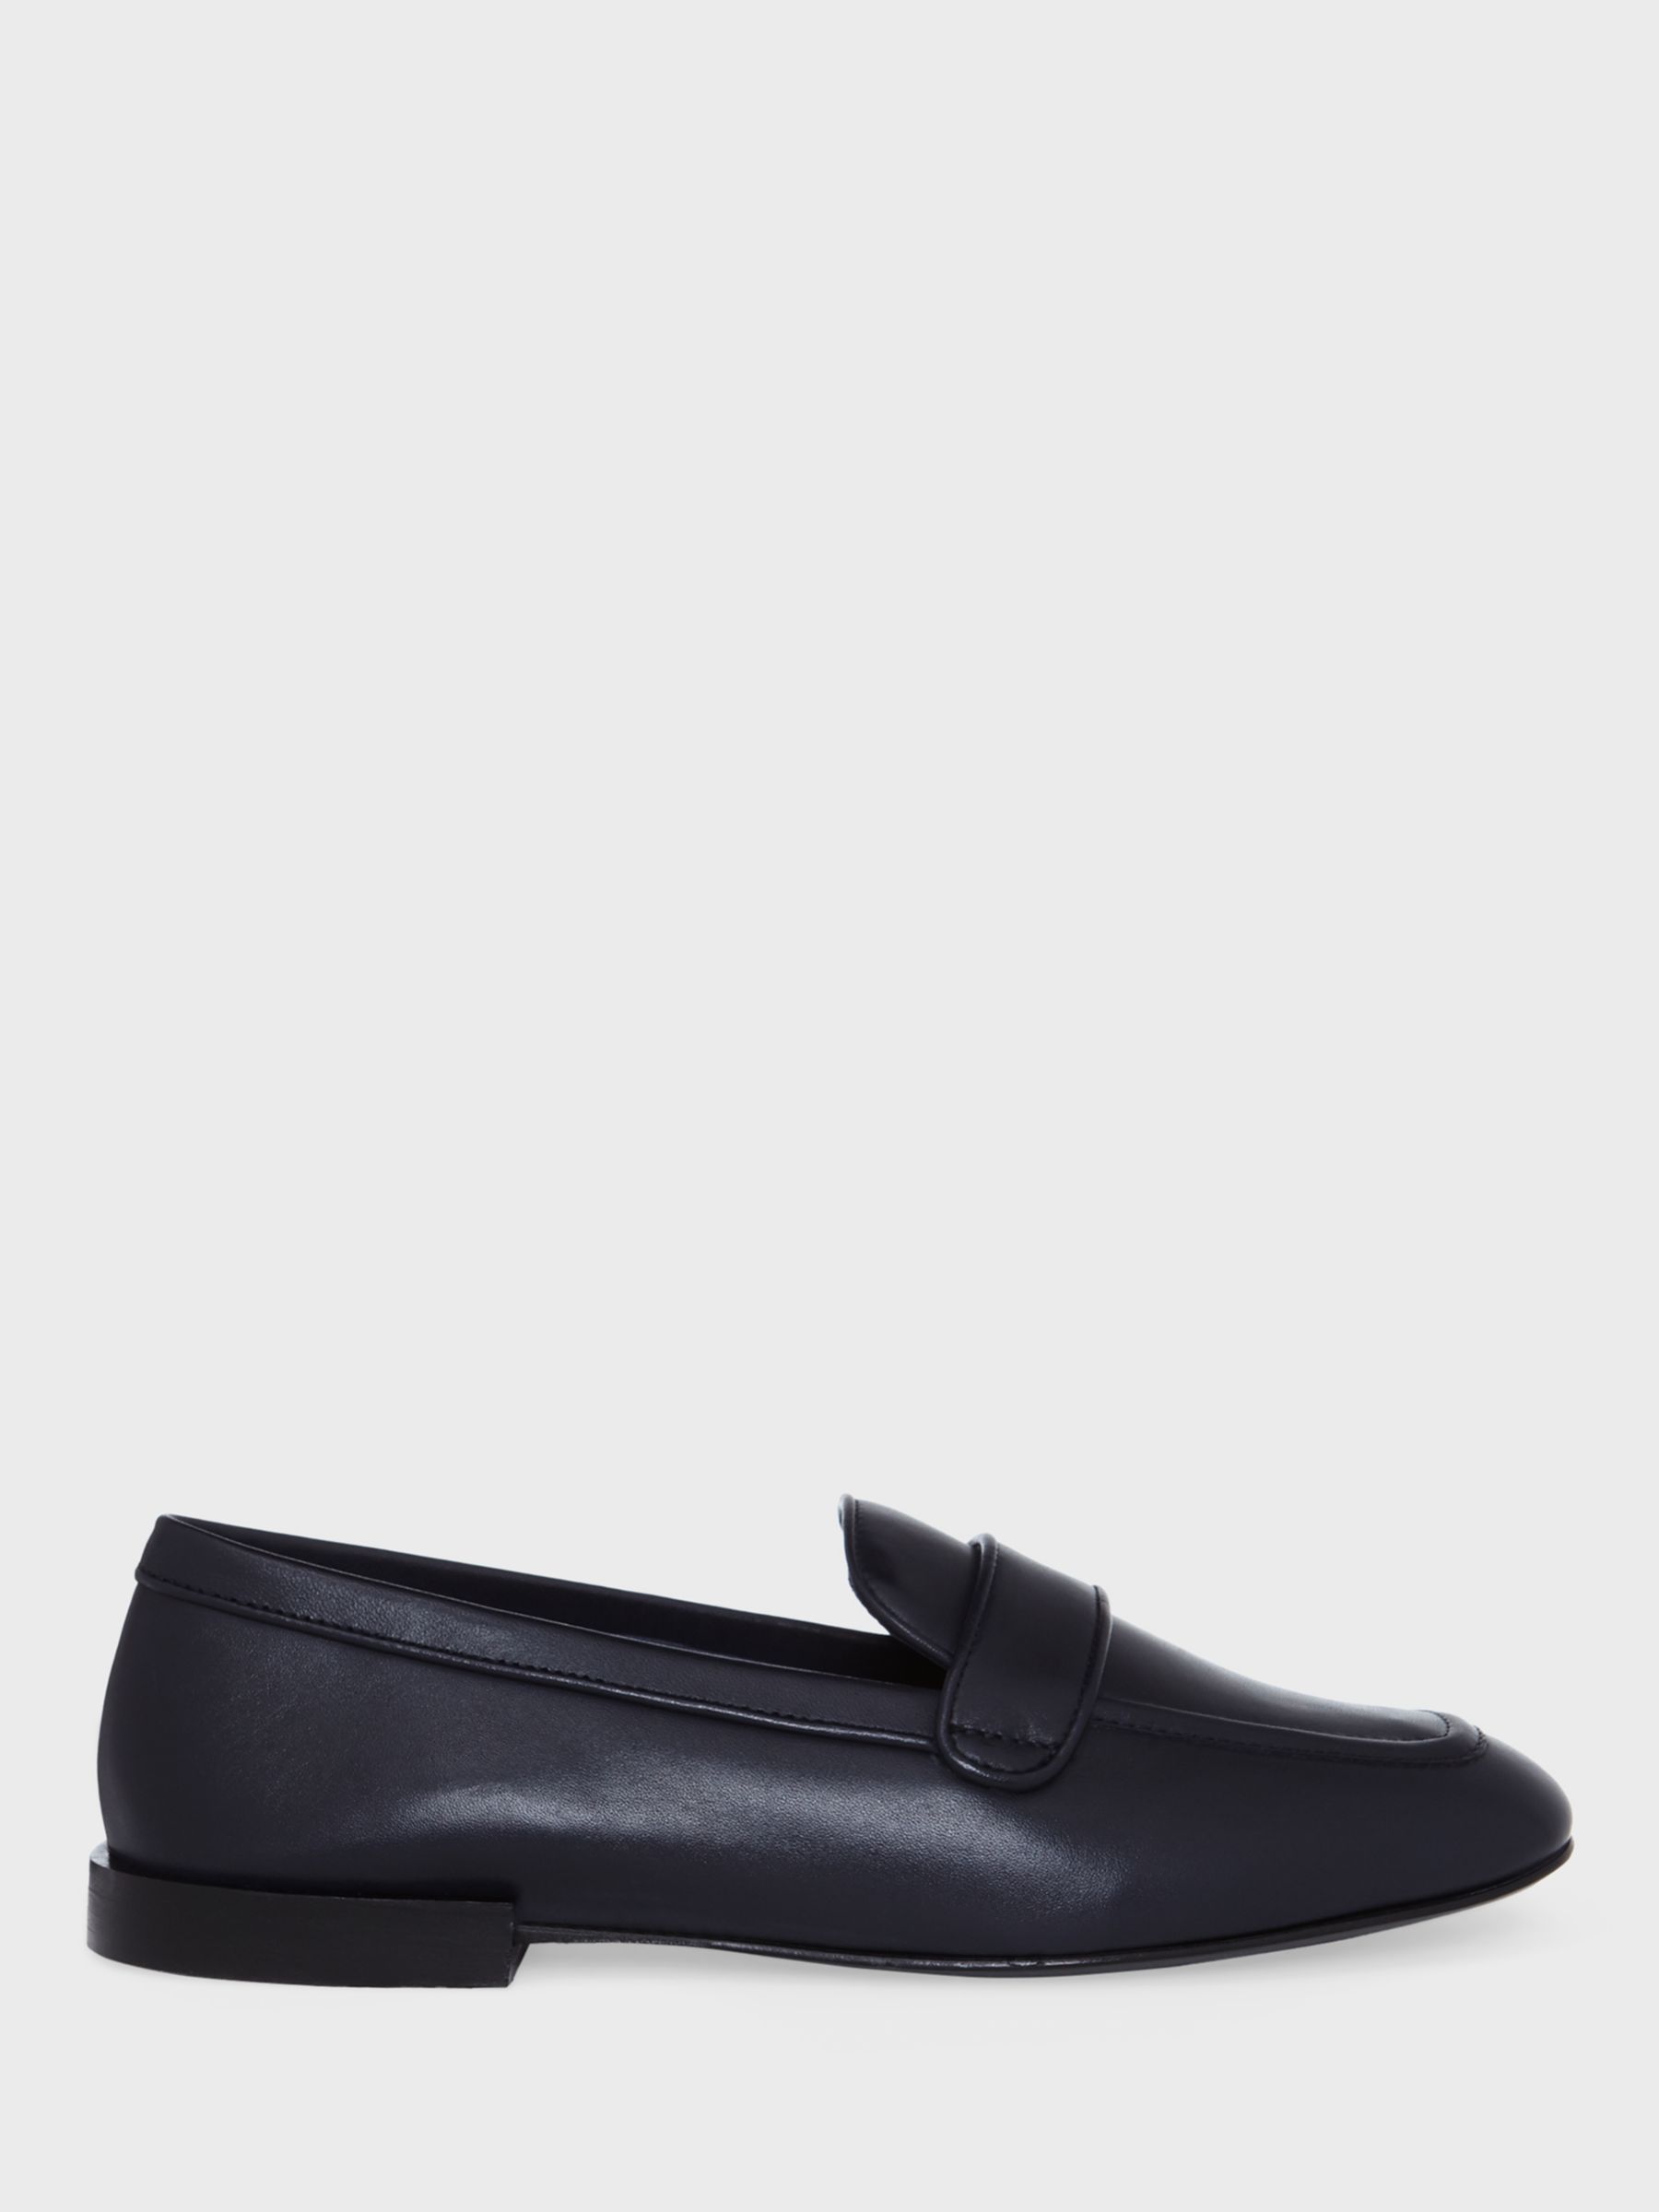 Hobbs Vivian Patent Leather Loafers, Navy at John Lewis & Partners